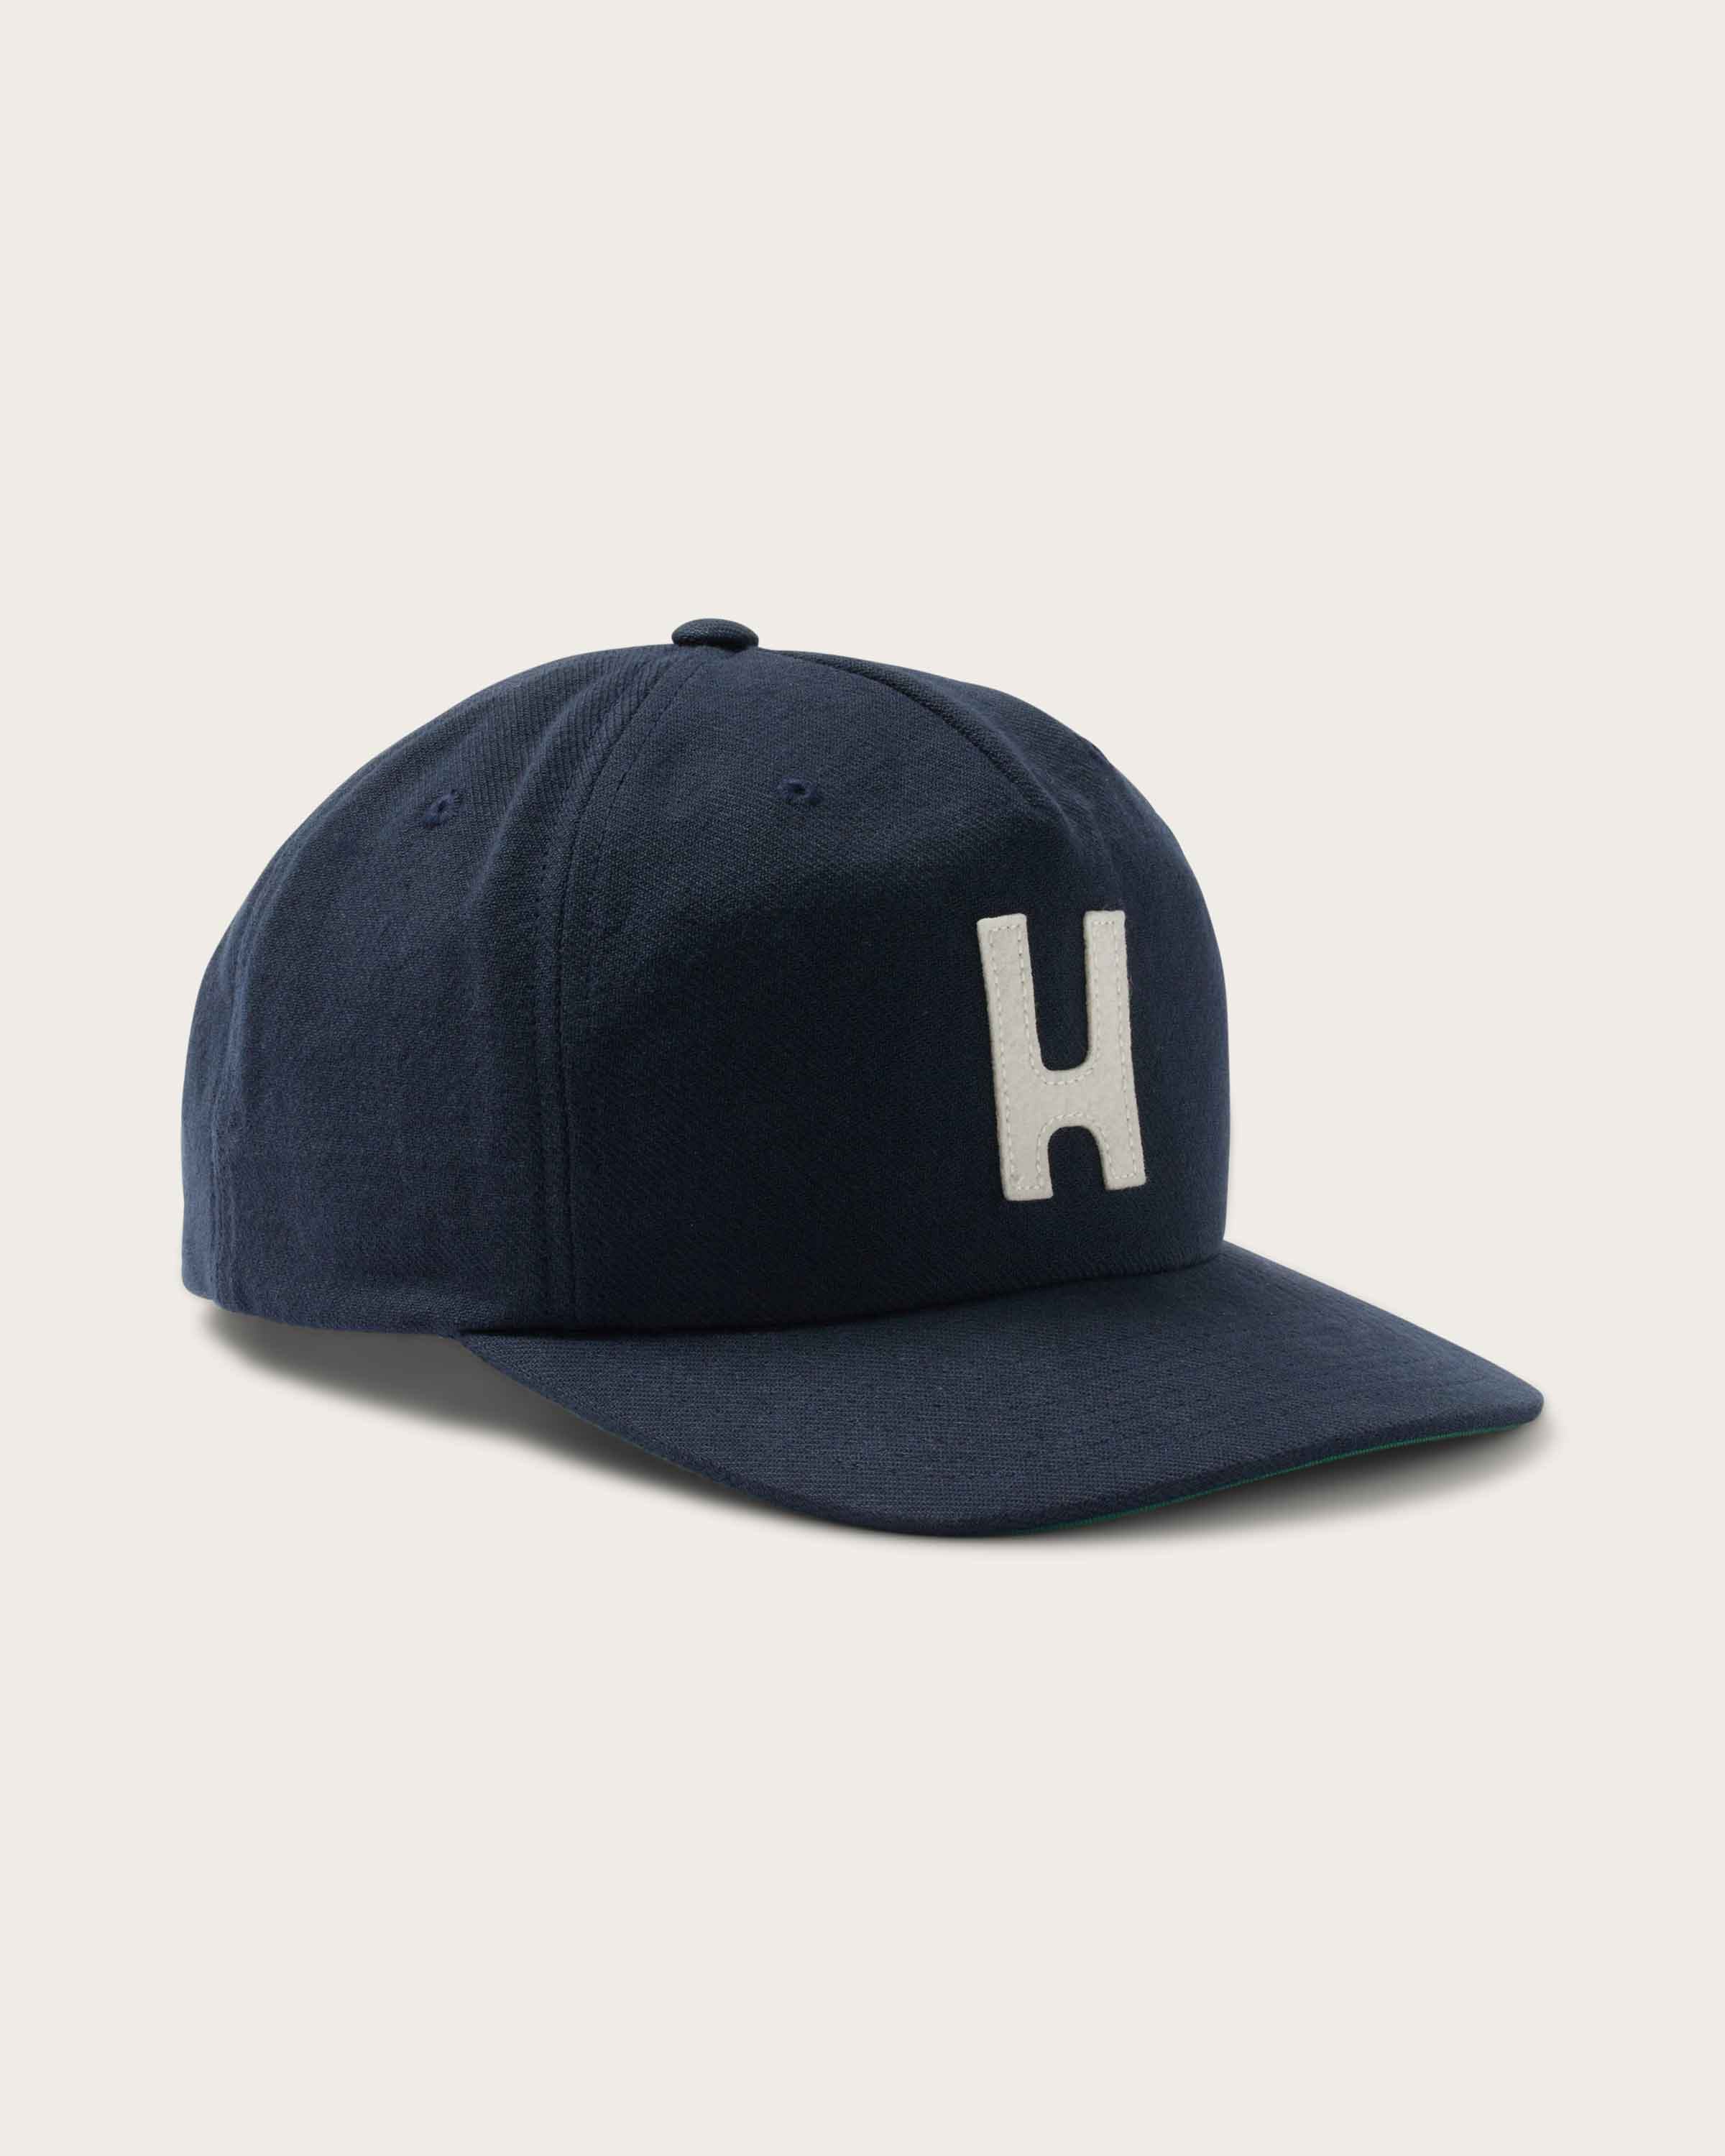 Thomas 5 Panel Hat in Navy - undefined - Hemlock Hat Co. Ball Caps